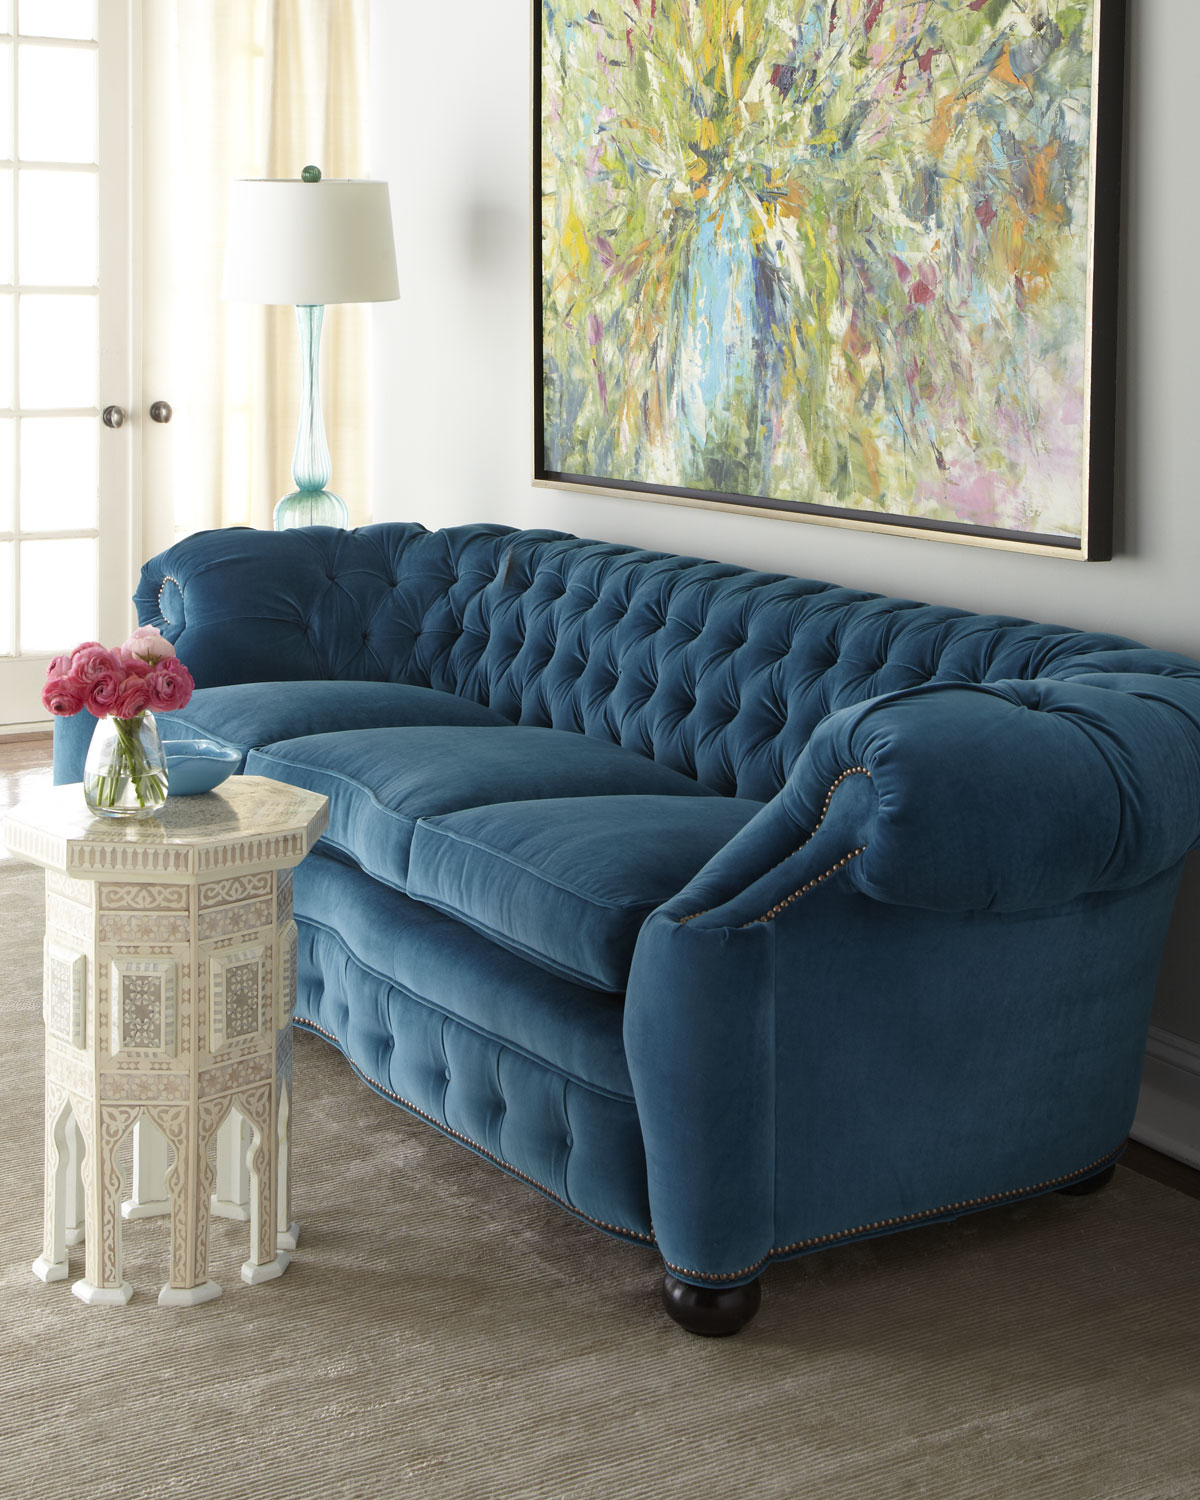 Old hickory tannery city club sofa love the teal color